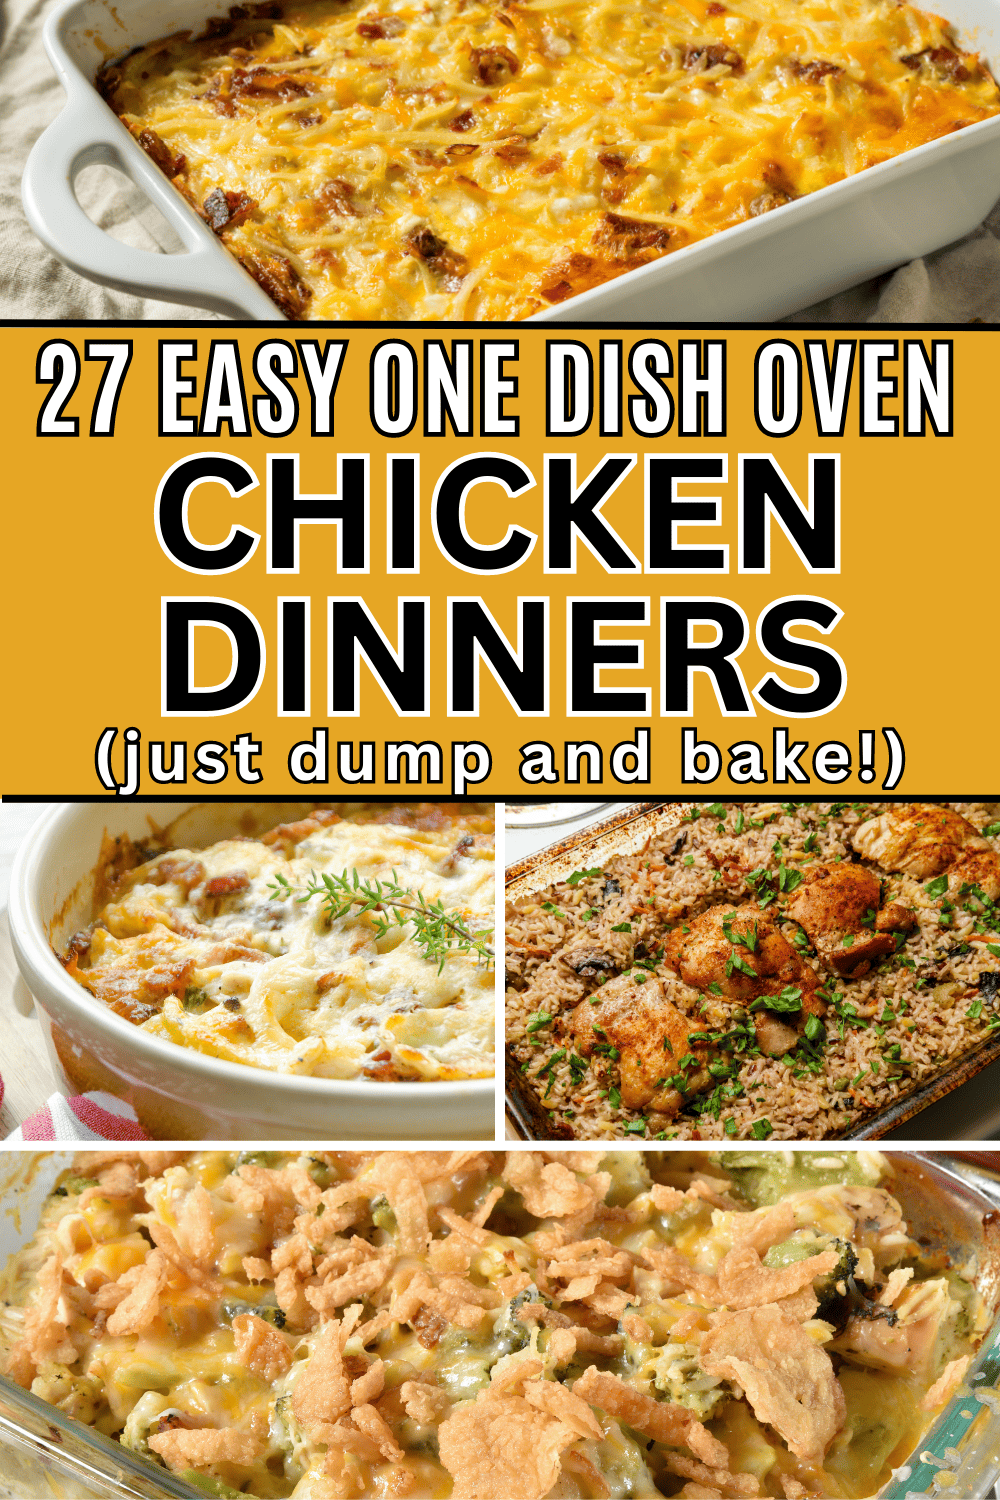 Easy Recipes For Dinner - 27 Recipes For Weeknight Meals